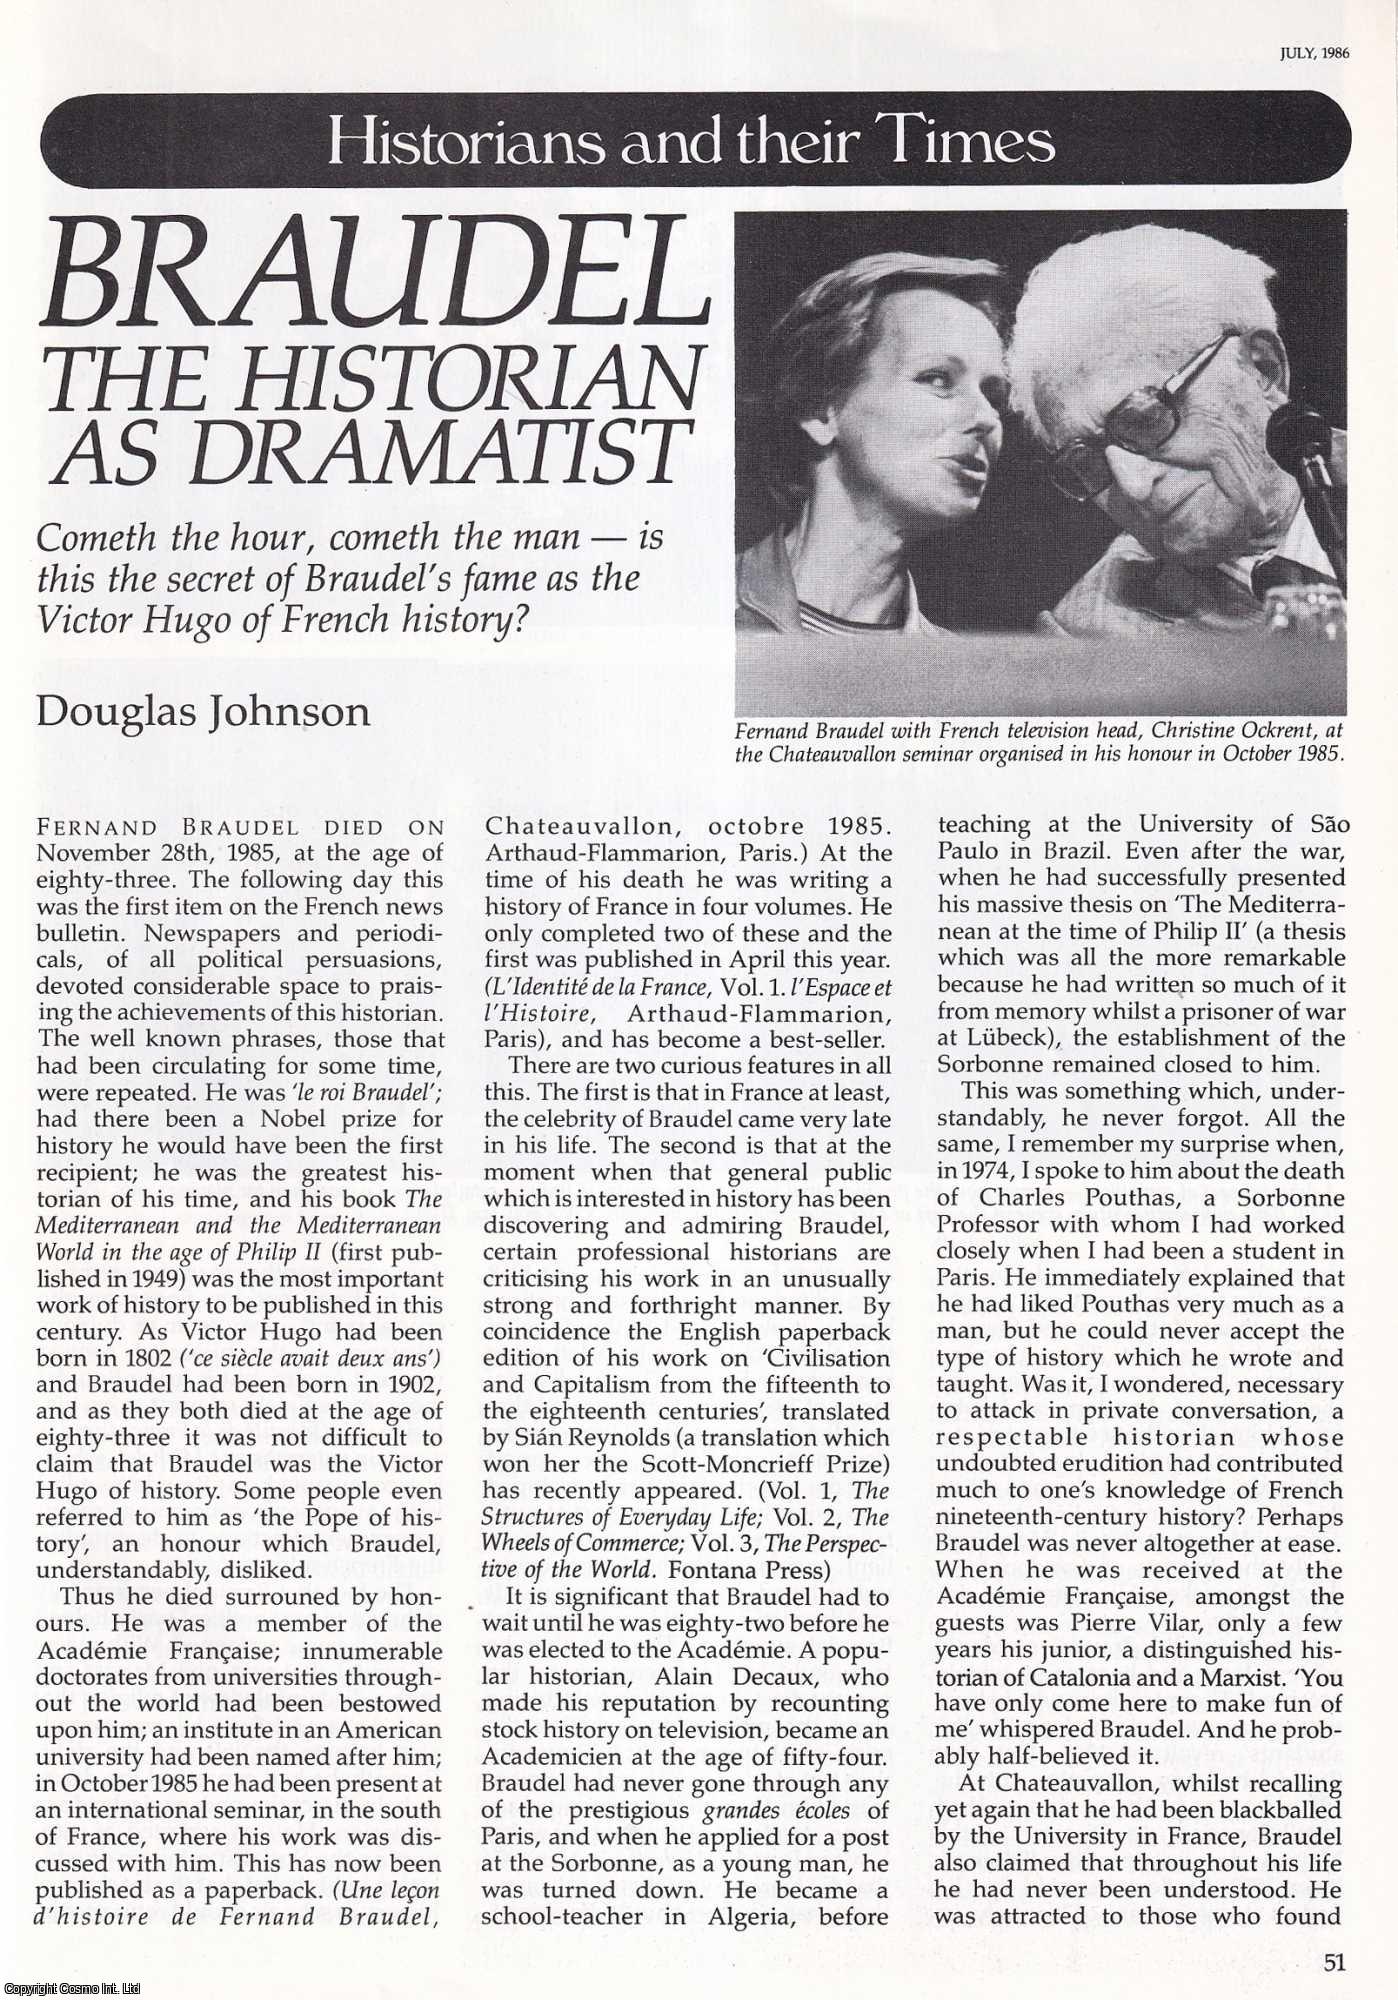 Douglas Johnson - Fernand Braudel, the Historian as Dramatist. An original article from History Today, 1986.